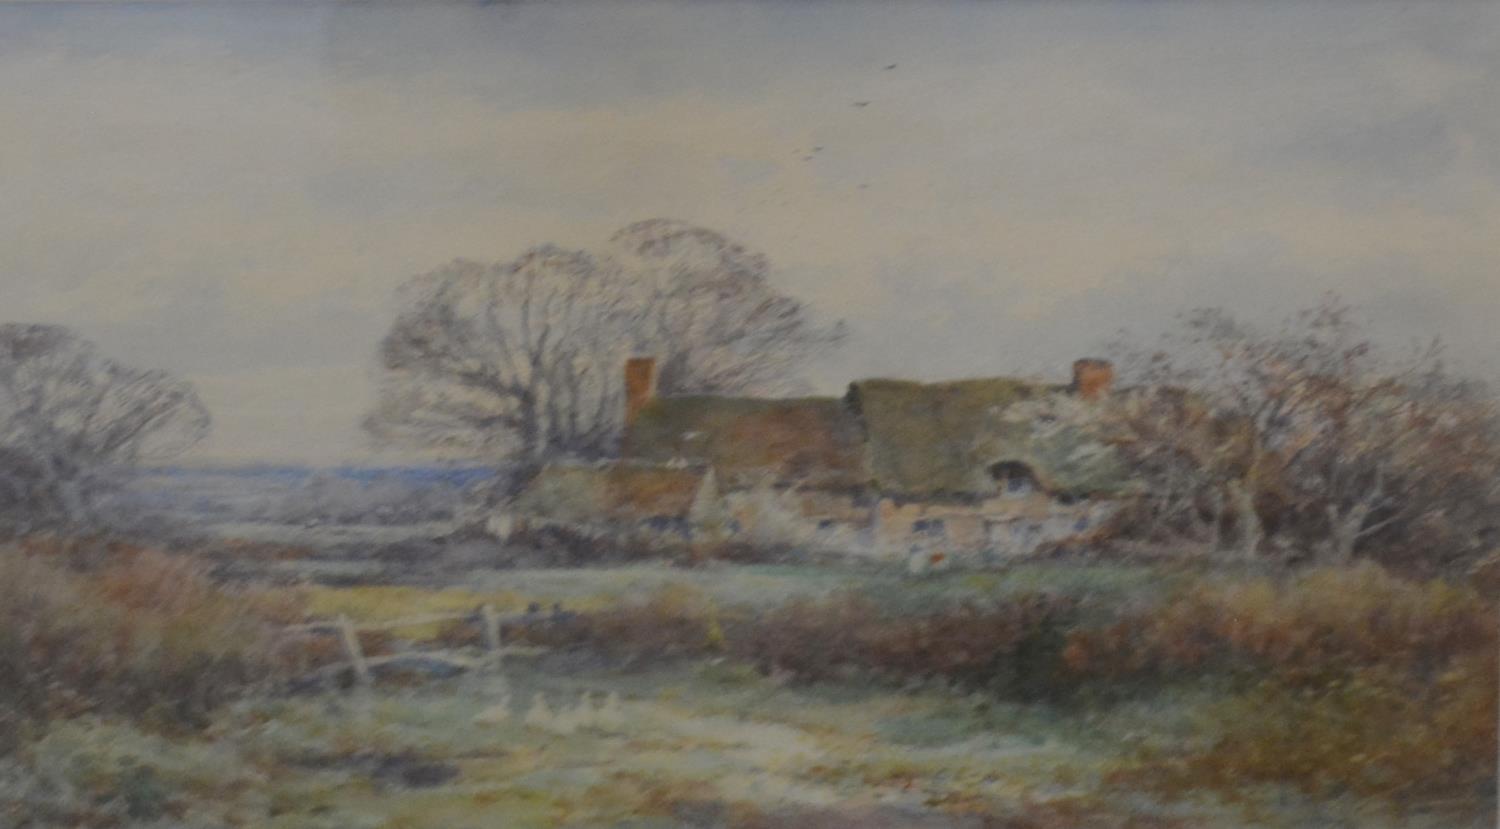 Attributed to Sylvester Stannard RVA, Old Cottages Dorset, watercolour, unsigned, 24x34 cms